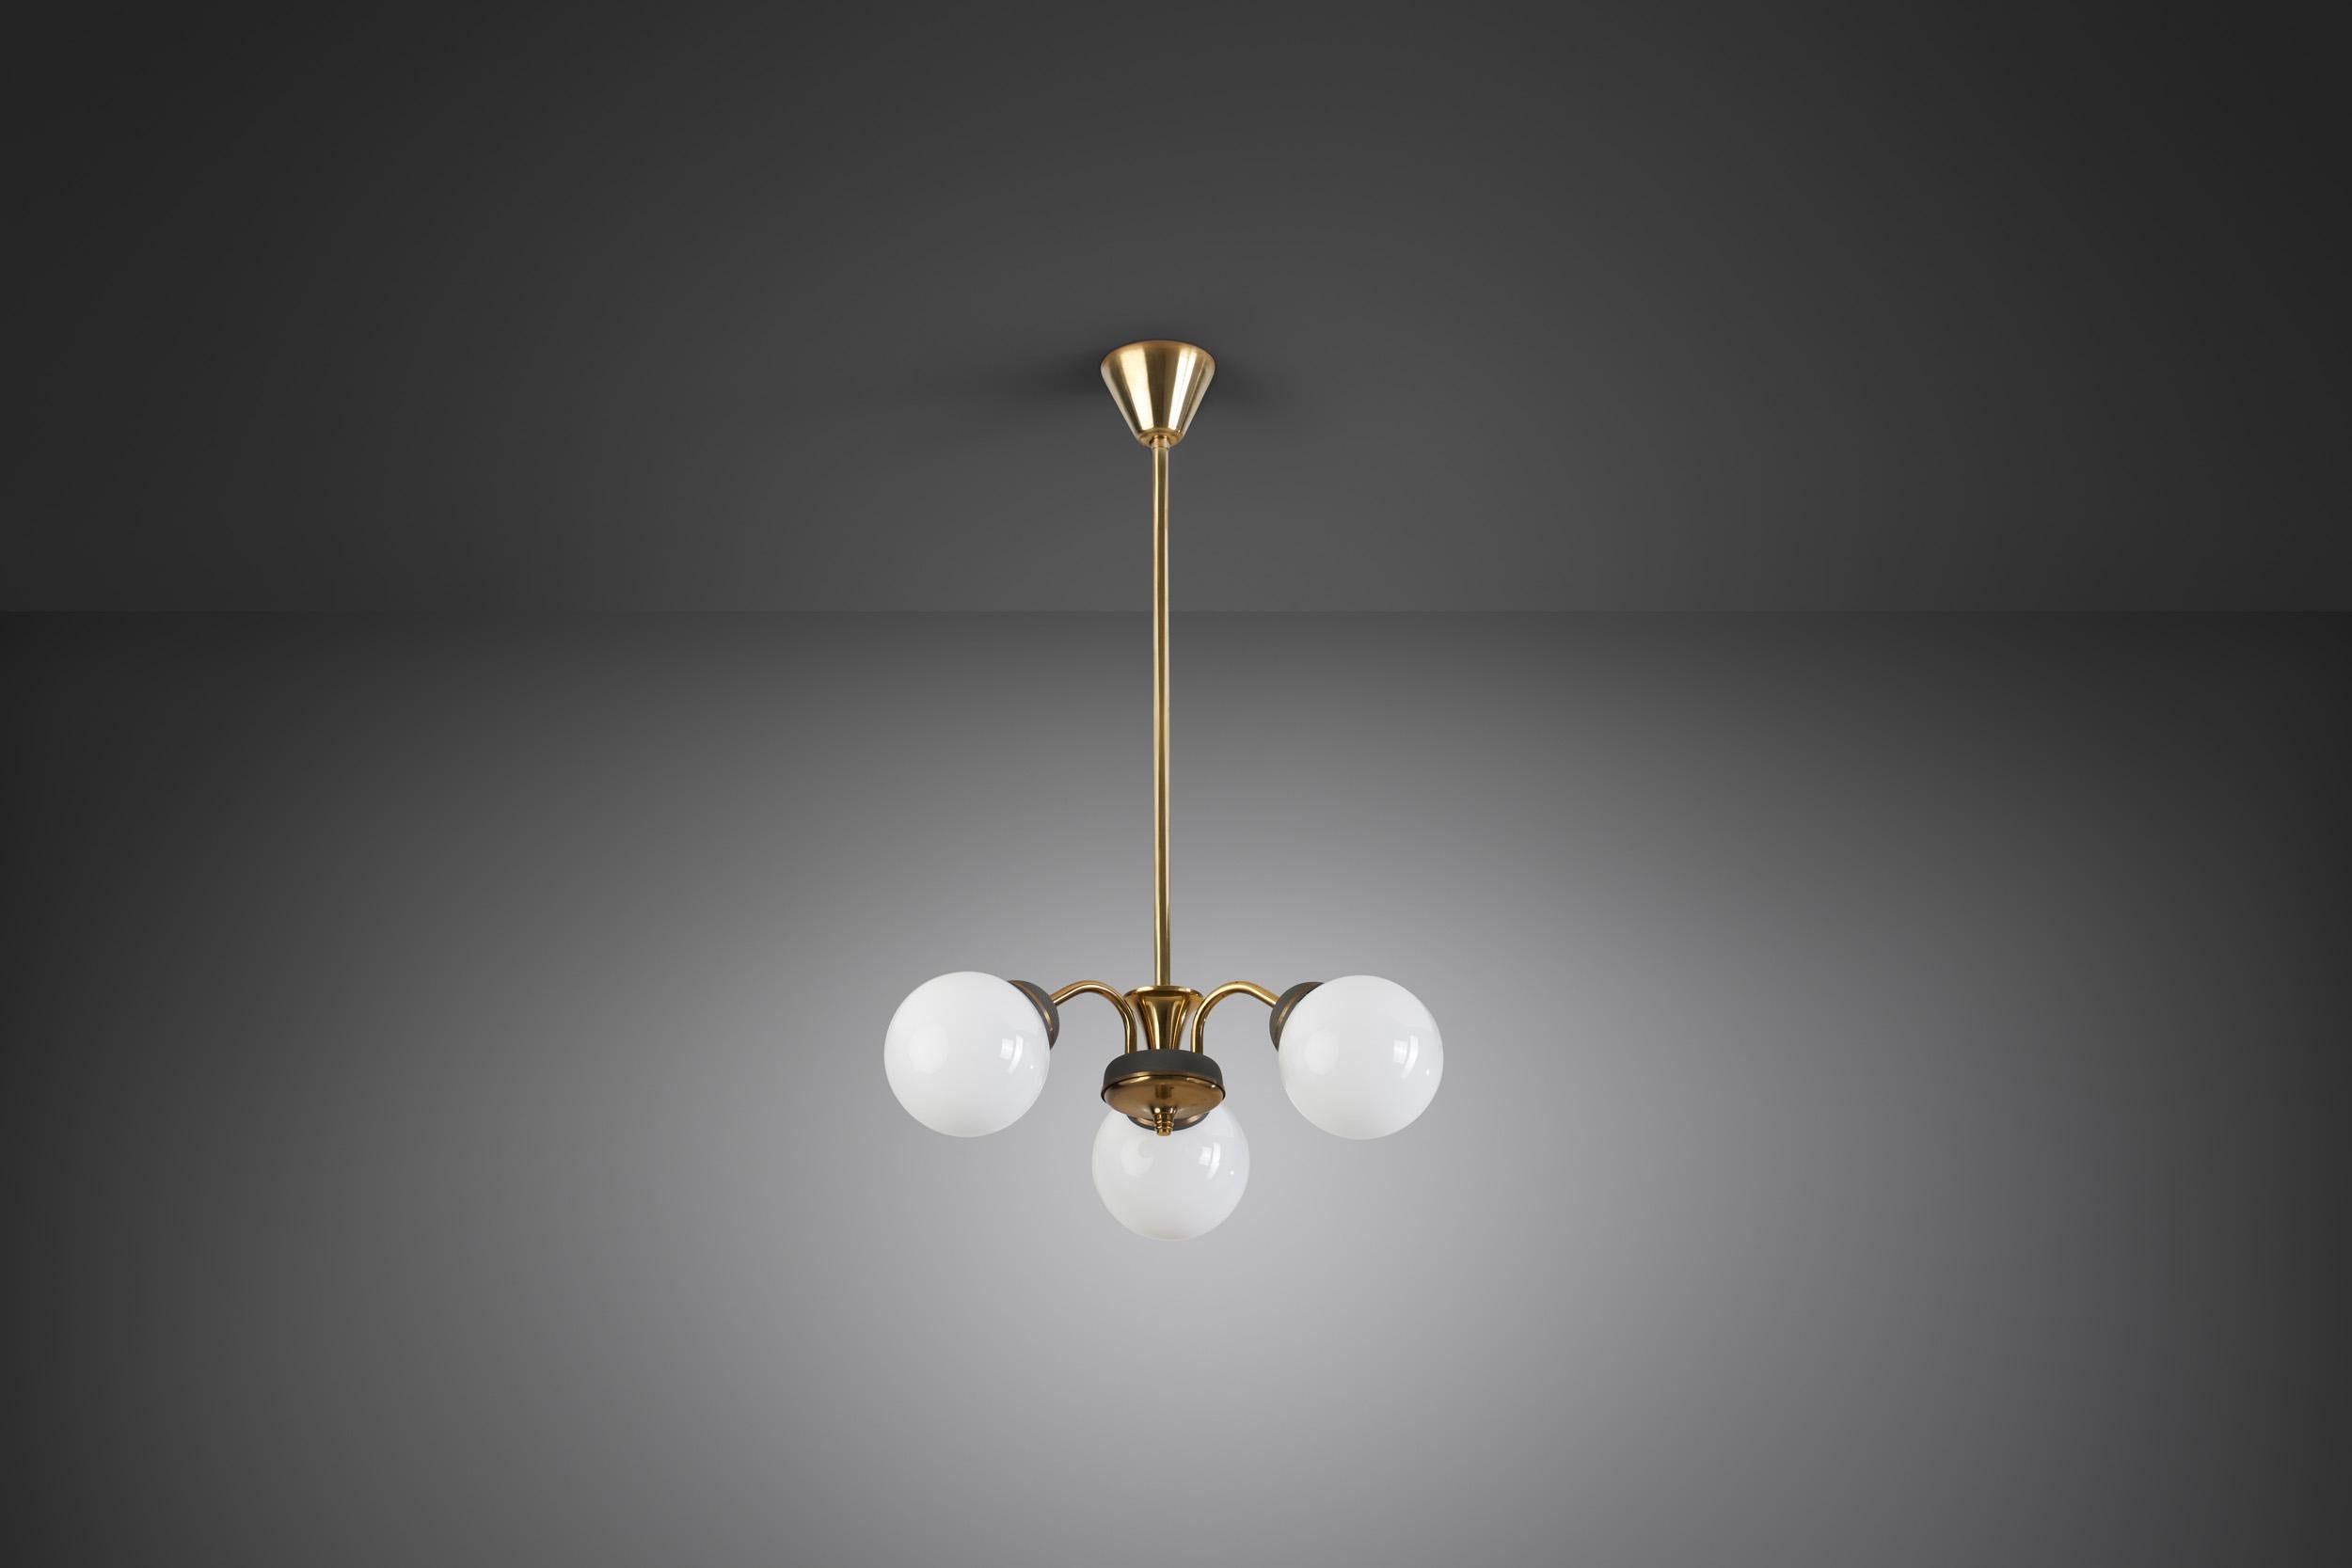 Brass Three-Armed Ceiling Lamp with Opal Glass Shades, Scandinavia 1950s For Sale 1